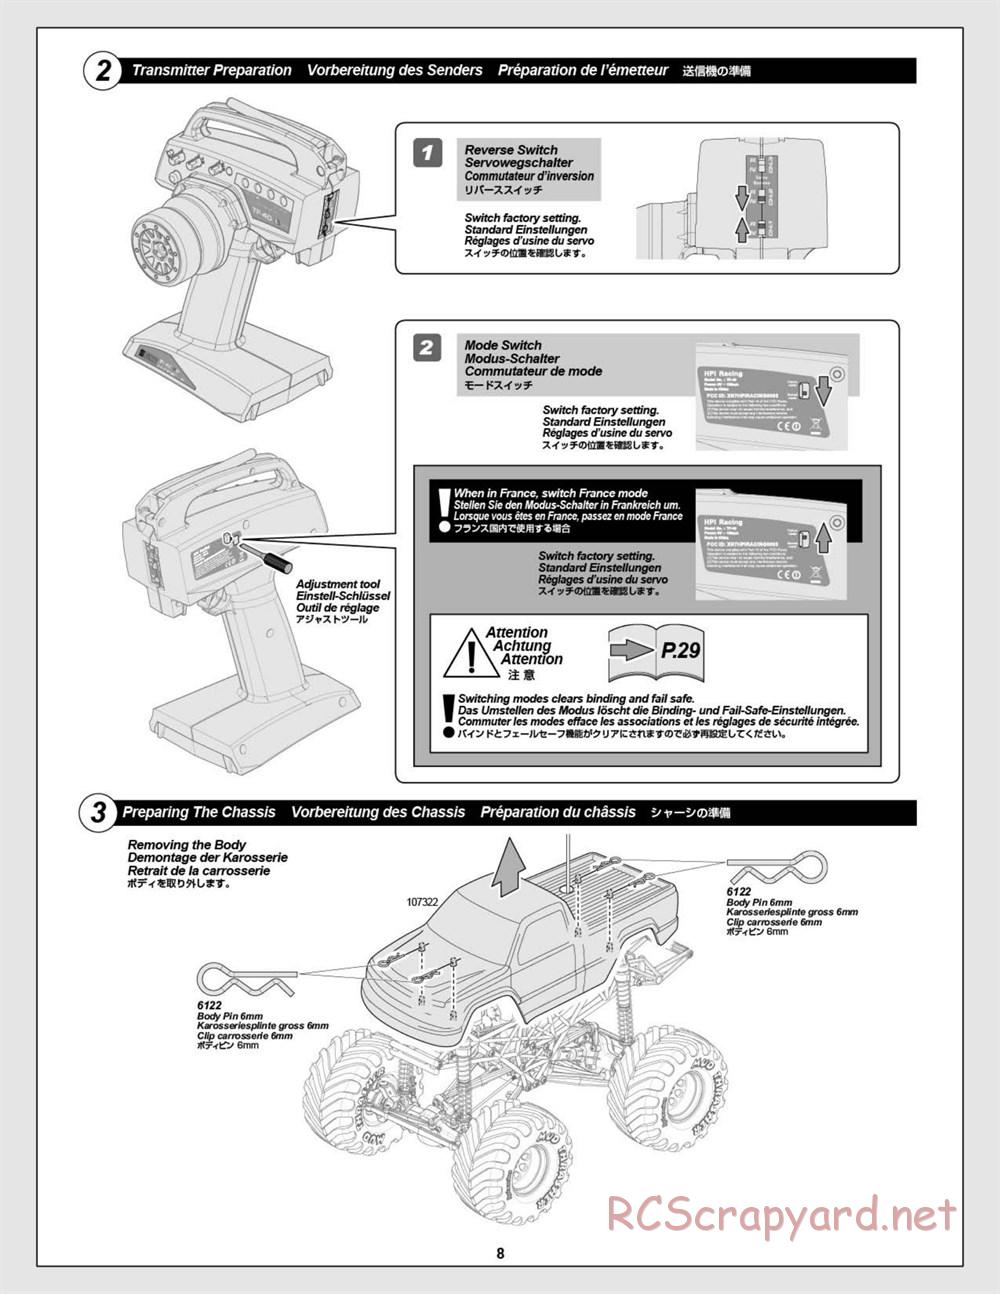 HPI - Wheely King 4x4 - Manual - Page 8